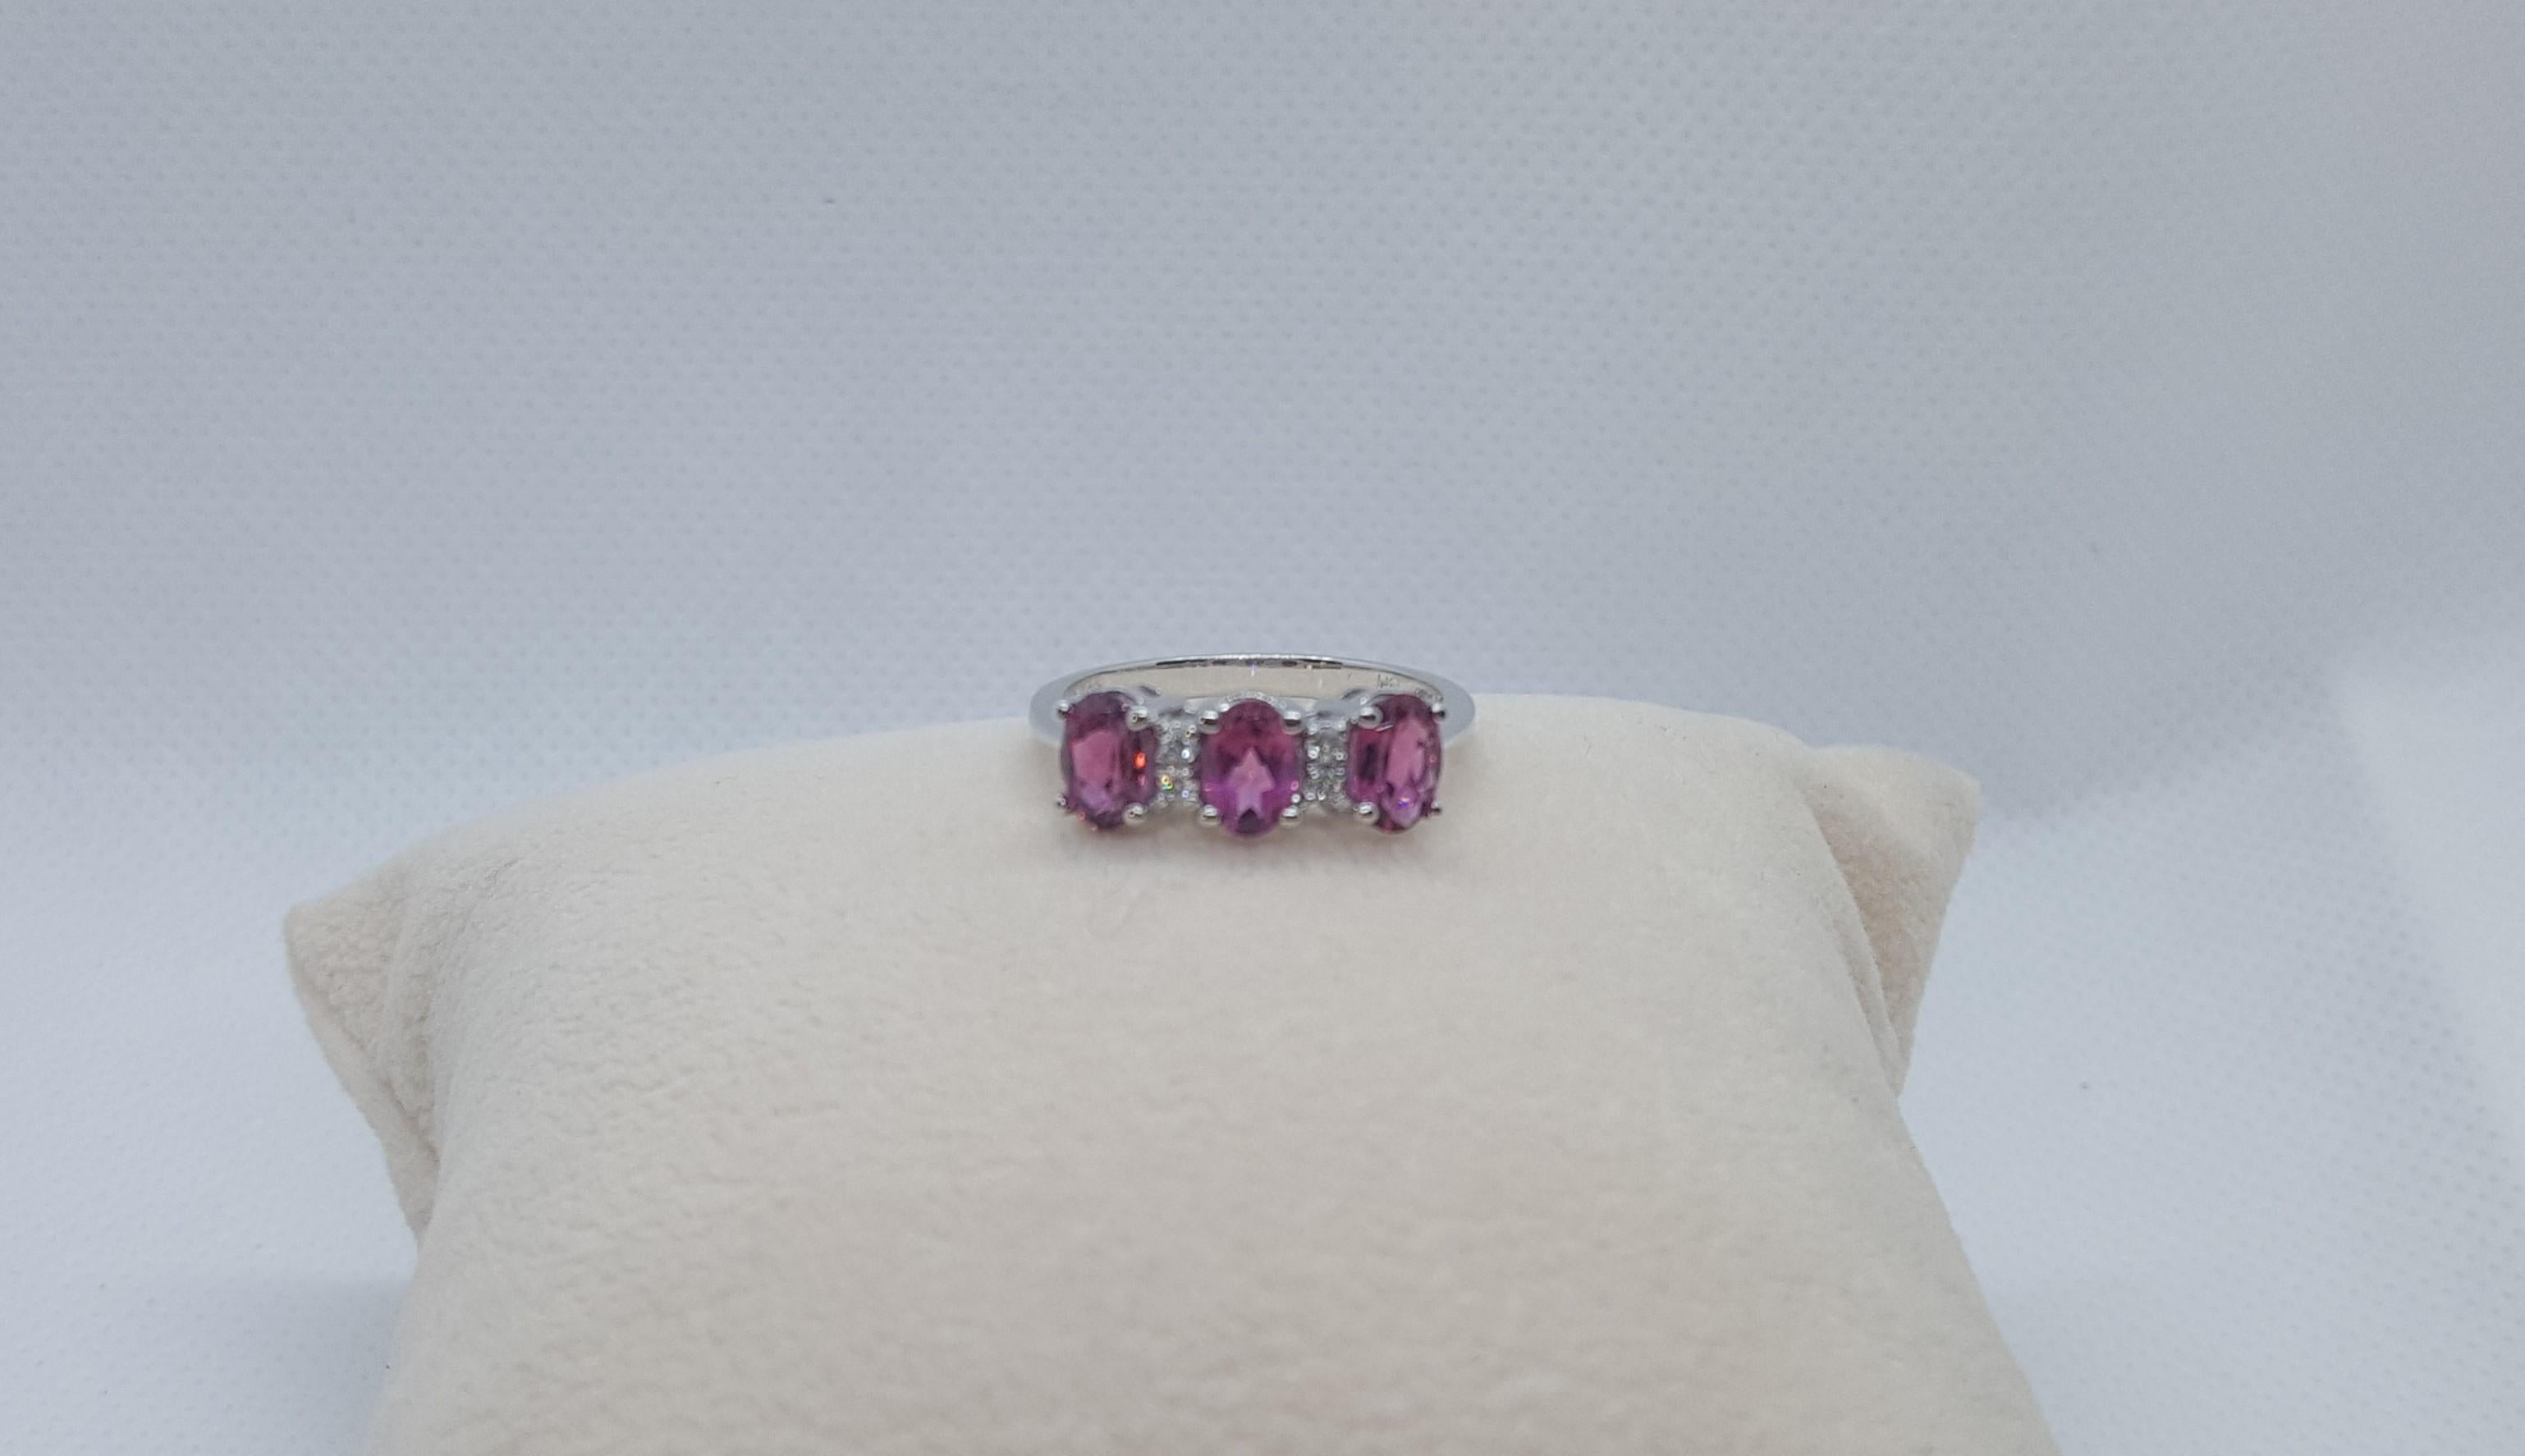 14kt white gold ring with three 6mm x 4mm oval rhodolites and three round brilliant diamonds of .05cttw. The ring is size 7, weighs 3.1 grams, and tapers from 6mm (top) to 2mm (base). The diamonds are well-proportioned, g/h in color and si in